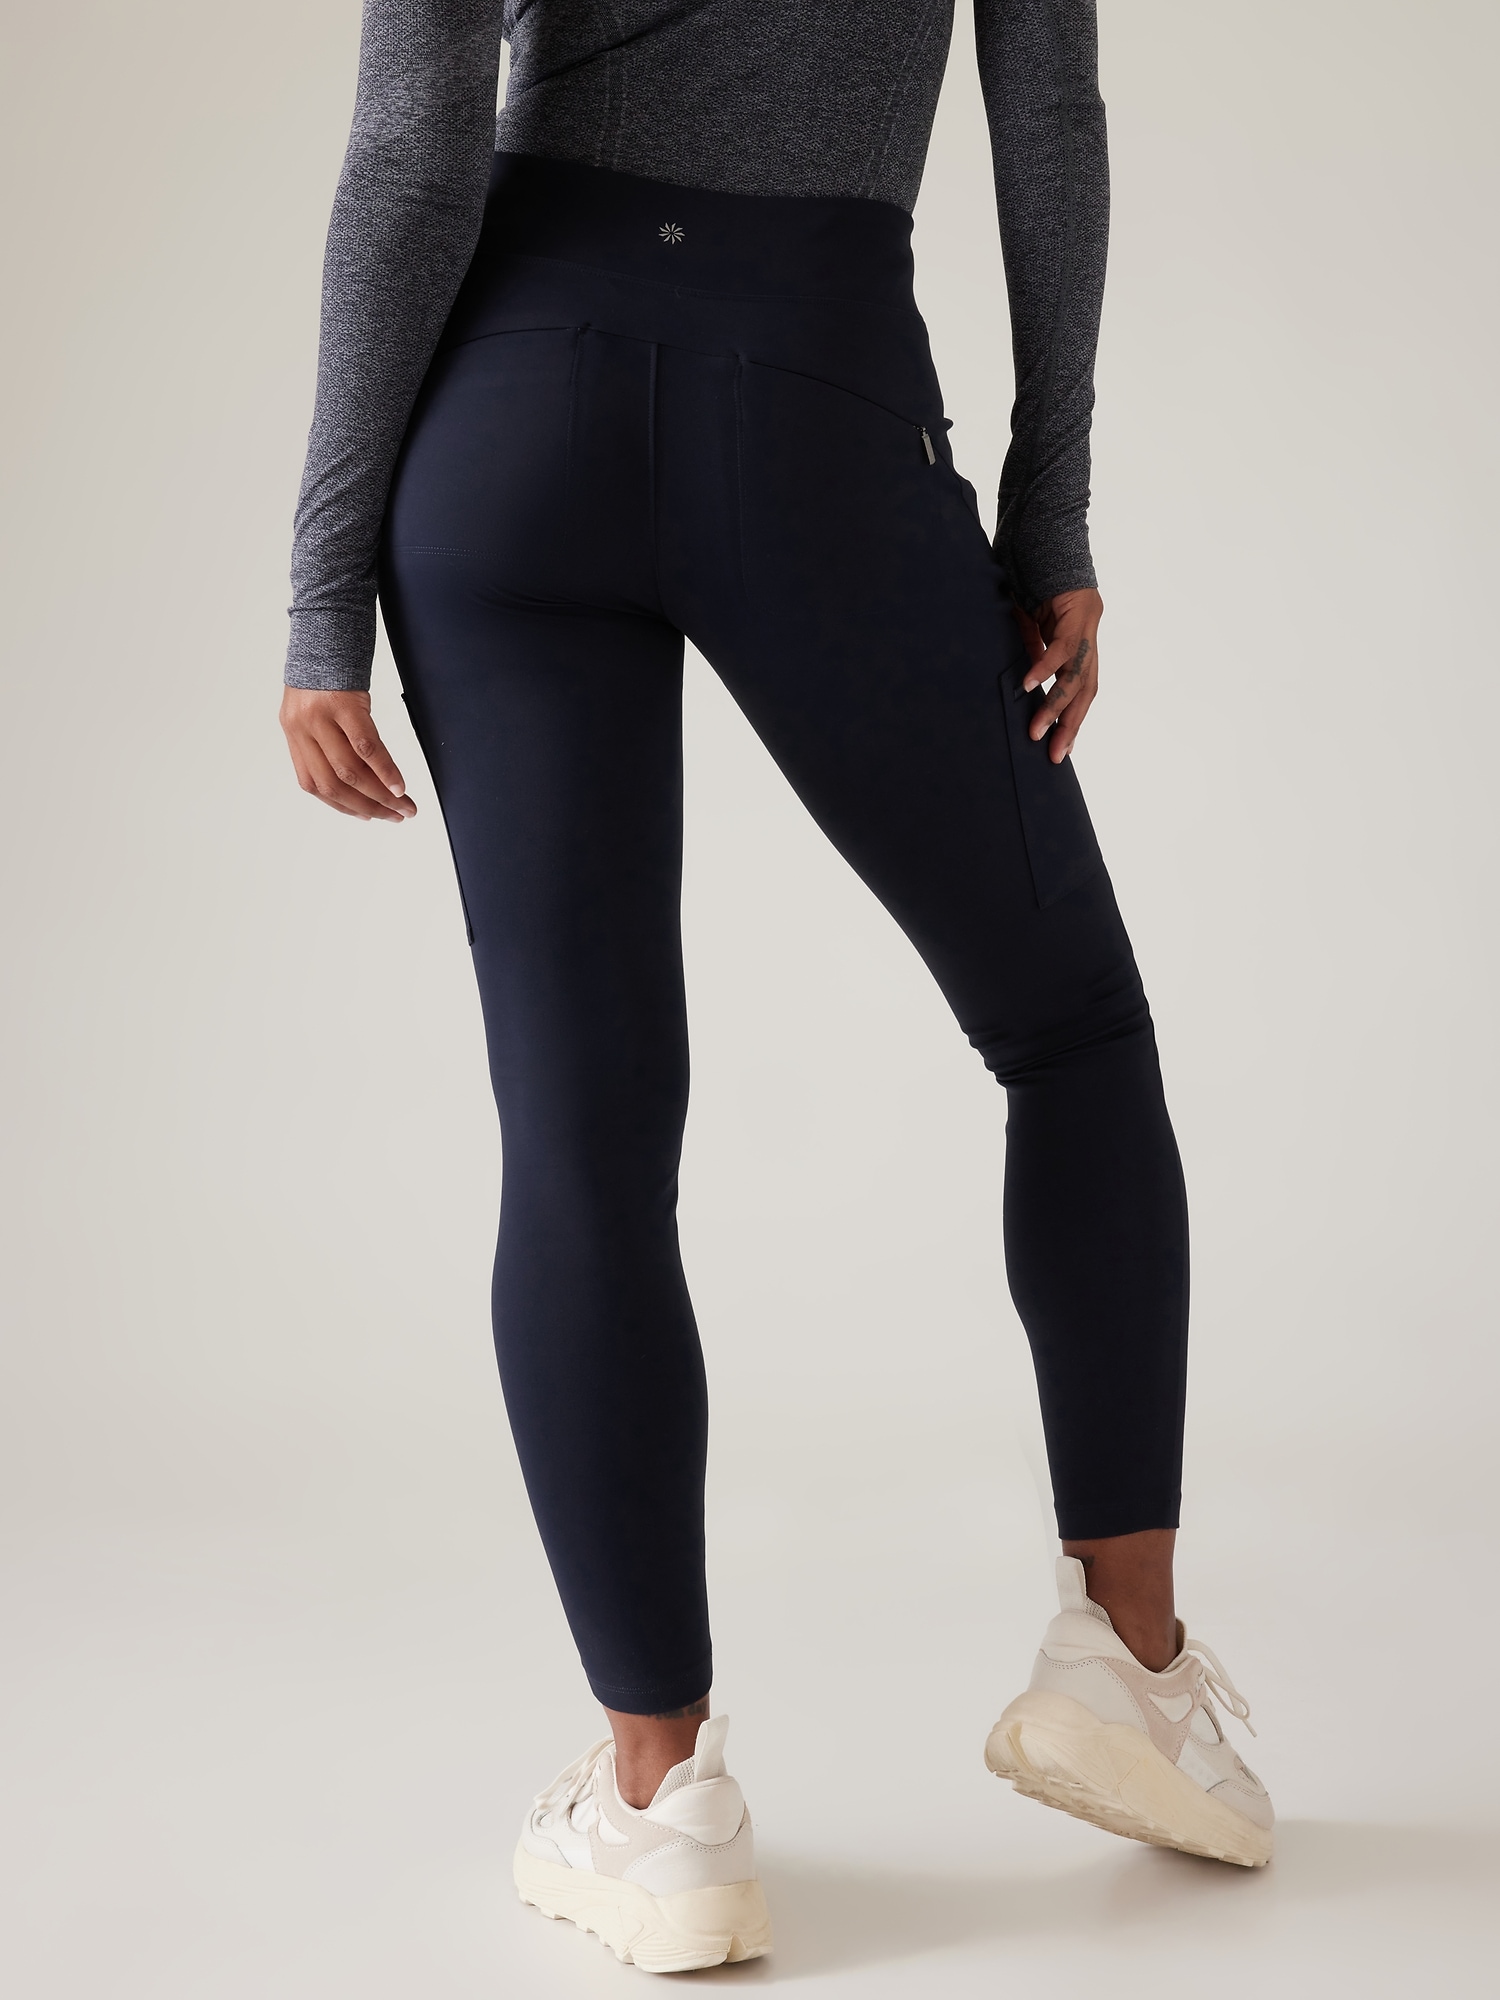 My fave no middle inseam leggings! Comment N03 for links